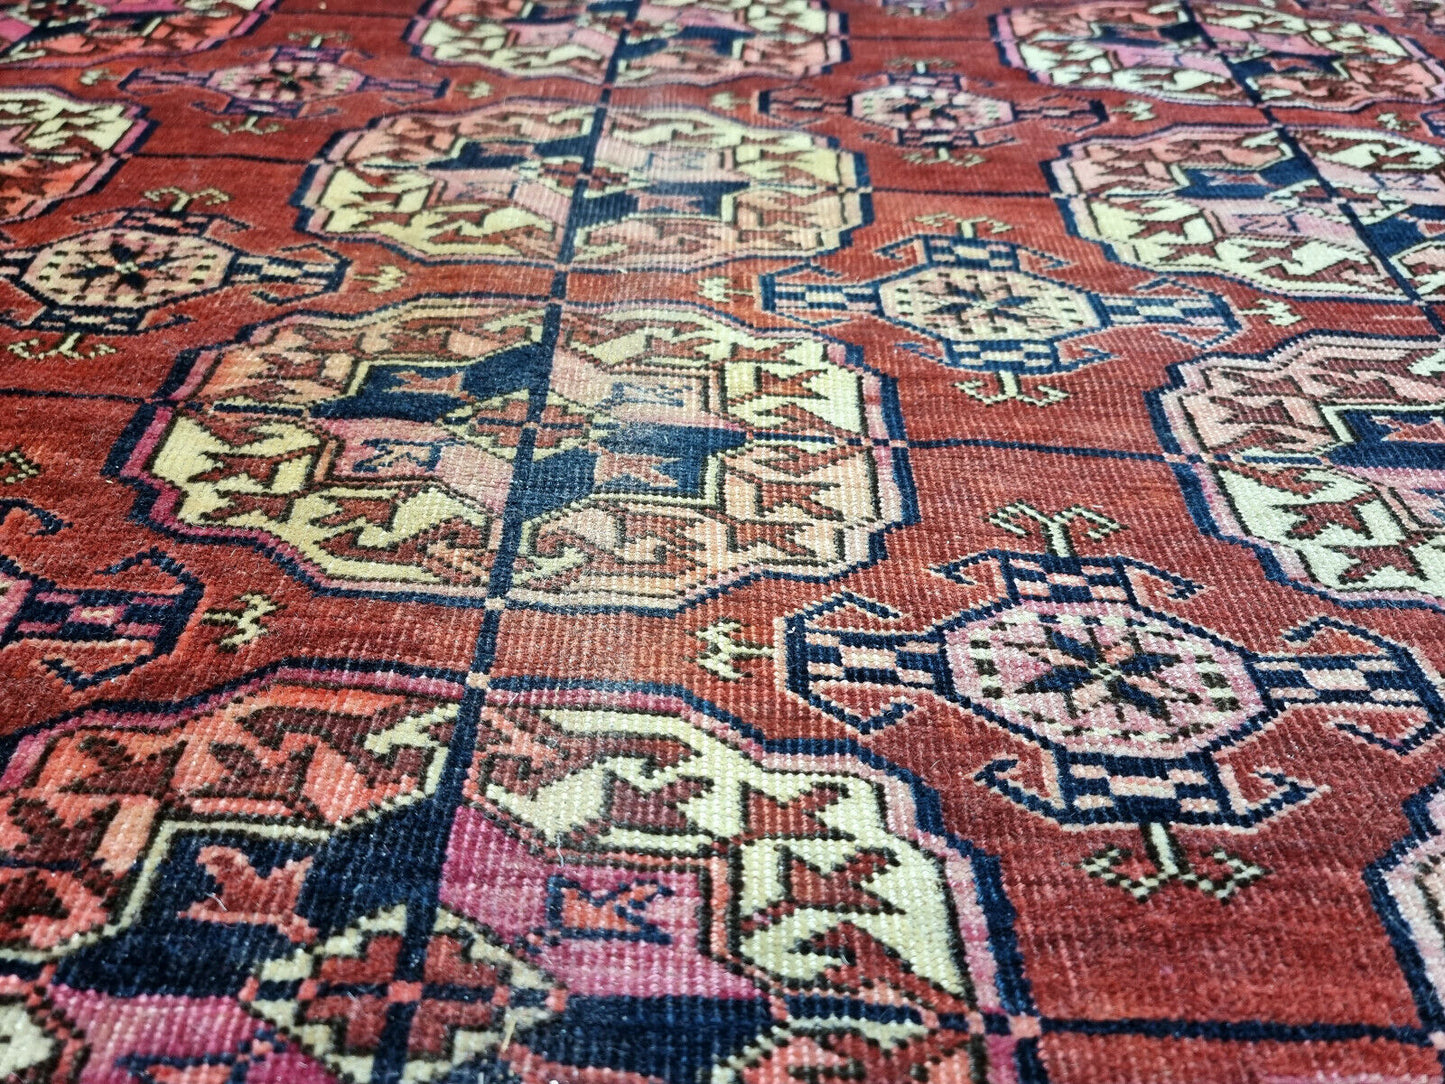 Close-up of signs of age and discoloration on Handmade Antique Turkmen Tekke Rug - Detailed view showcasing the antique nature of the rug with visible signs of age.